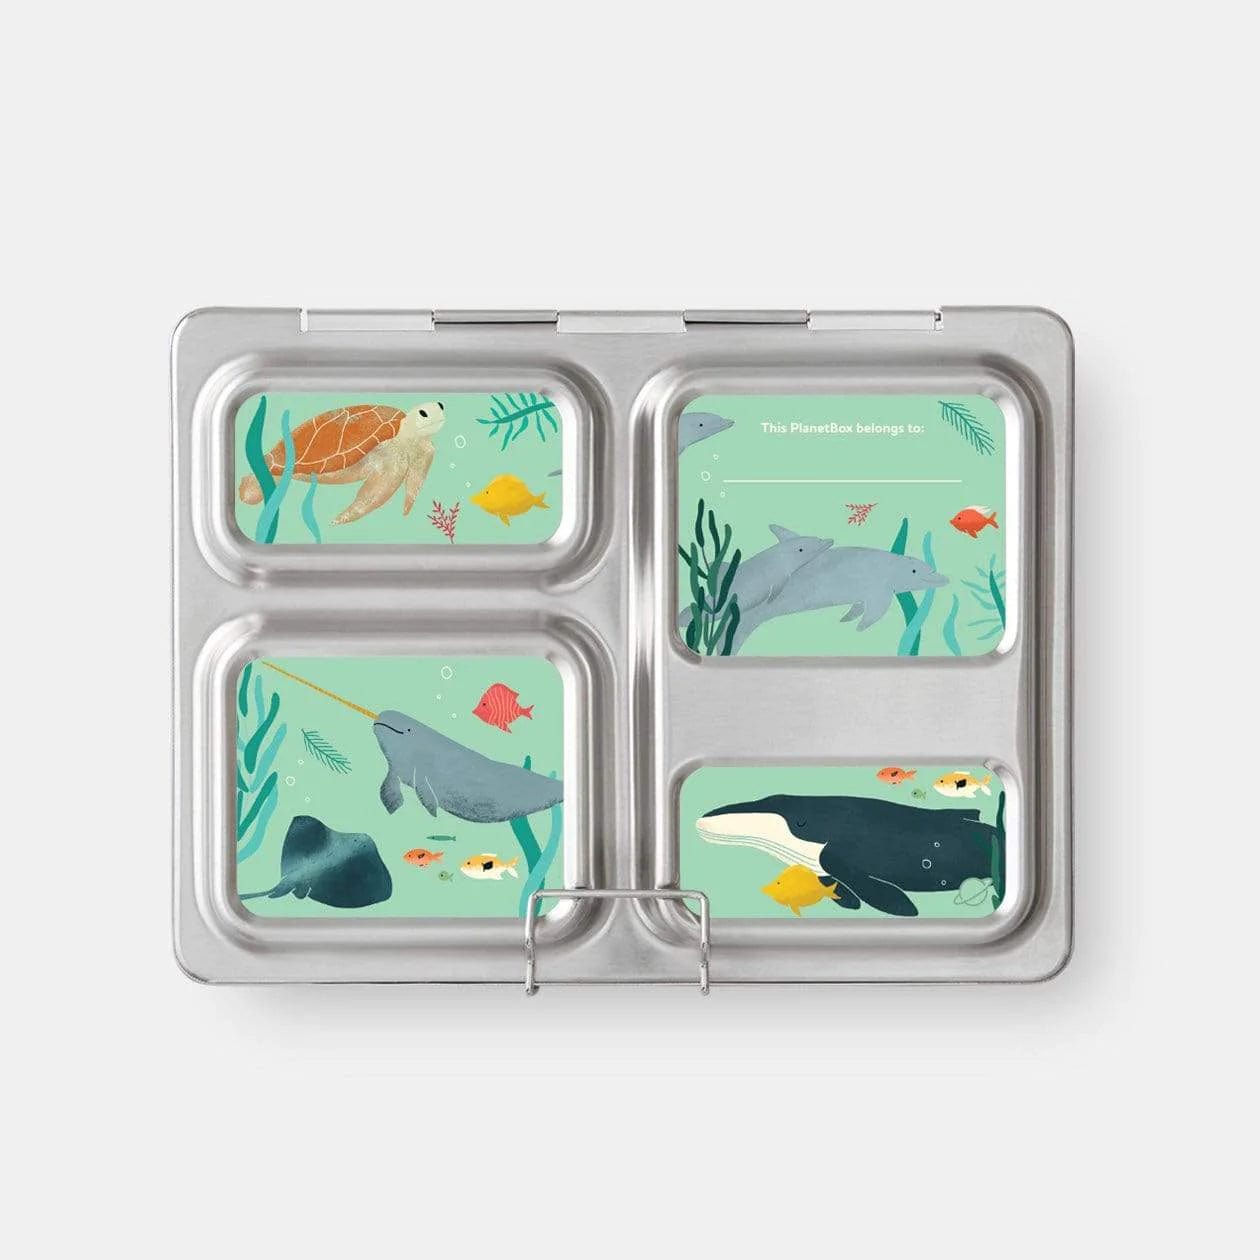 Planetbox Launch Magnet Sets Sea Life (New)